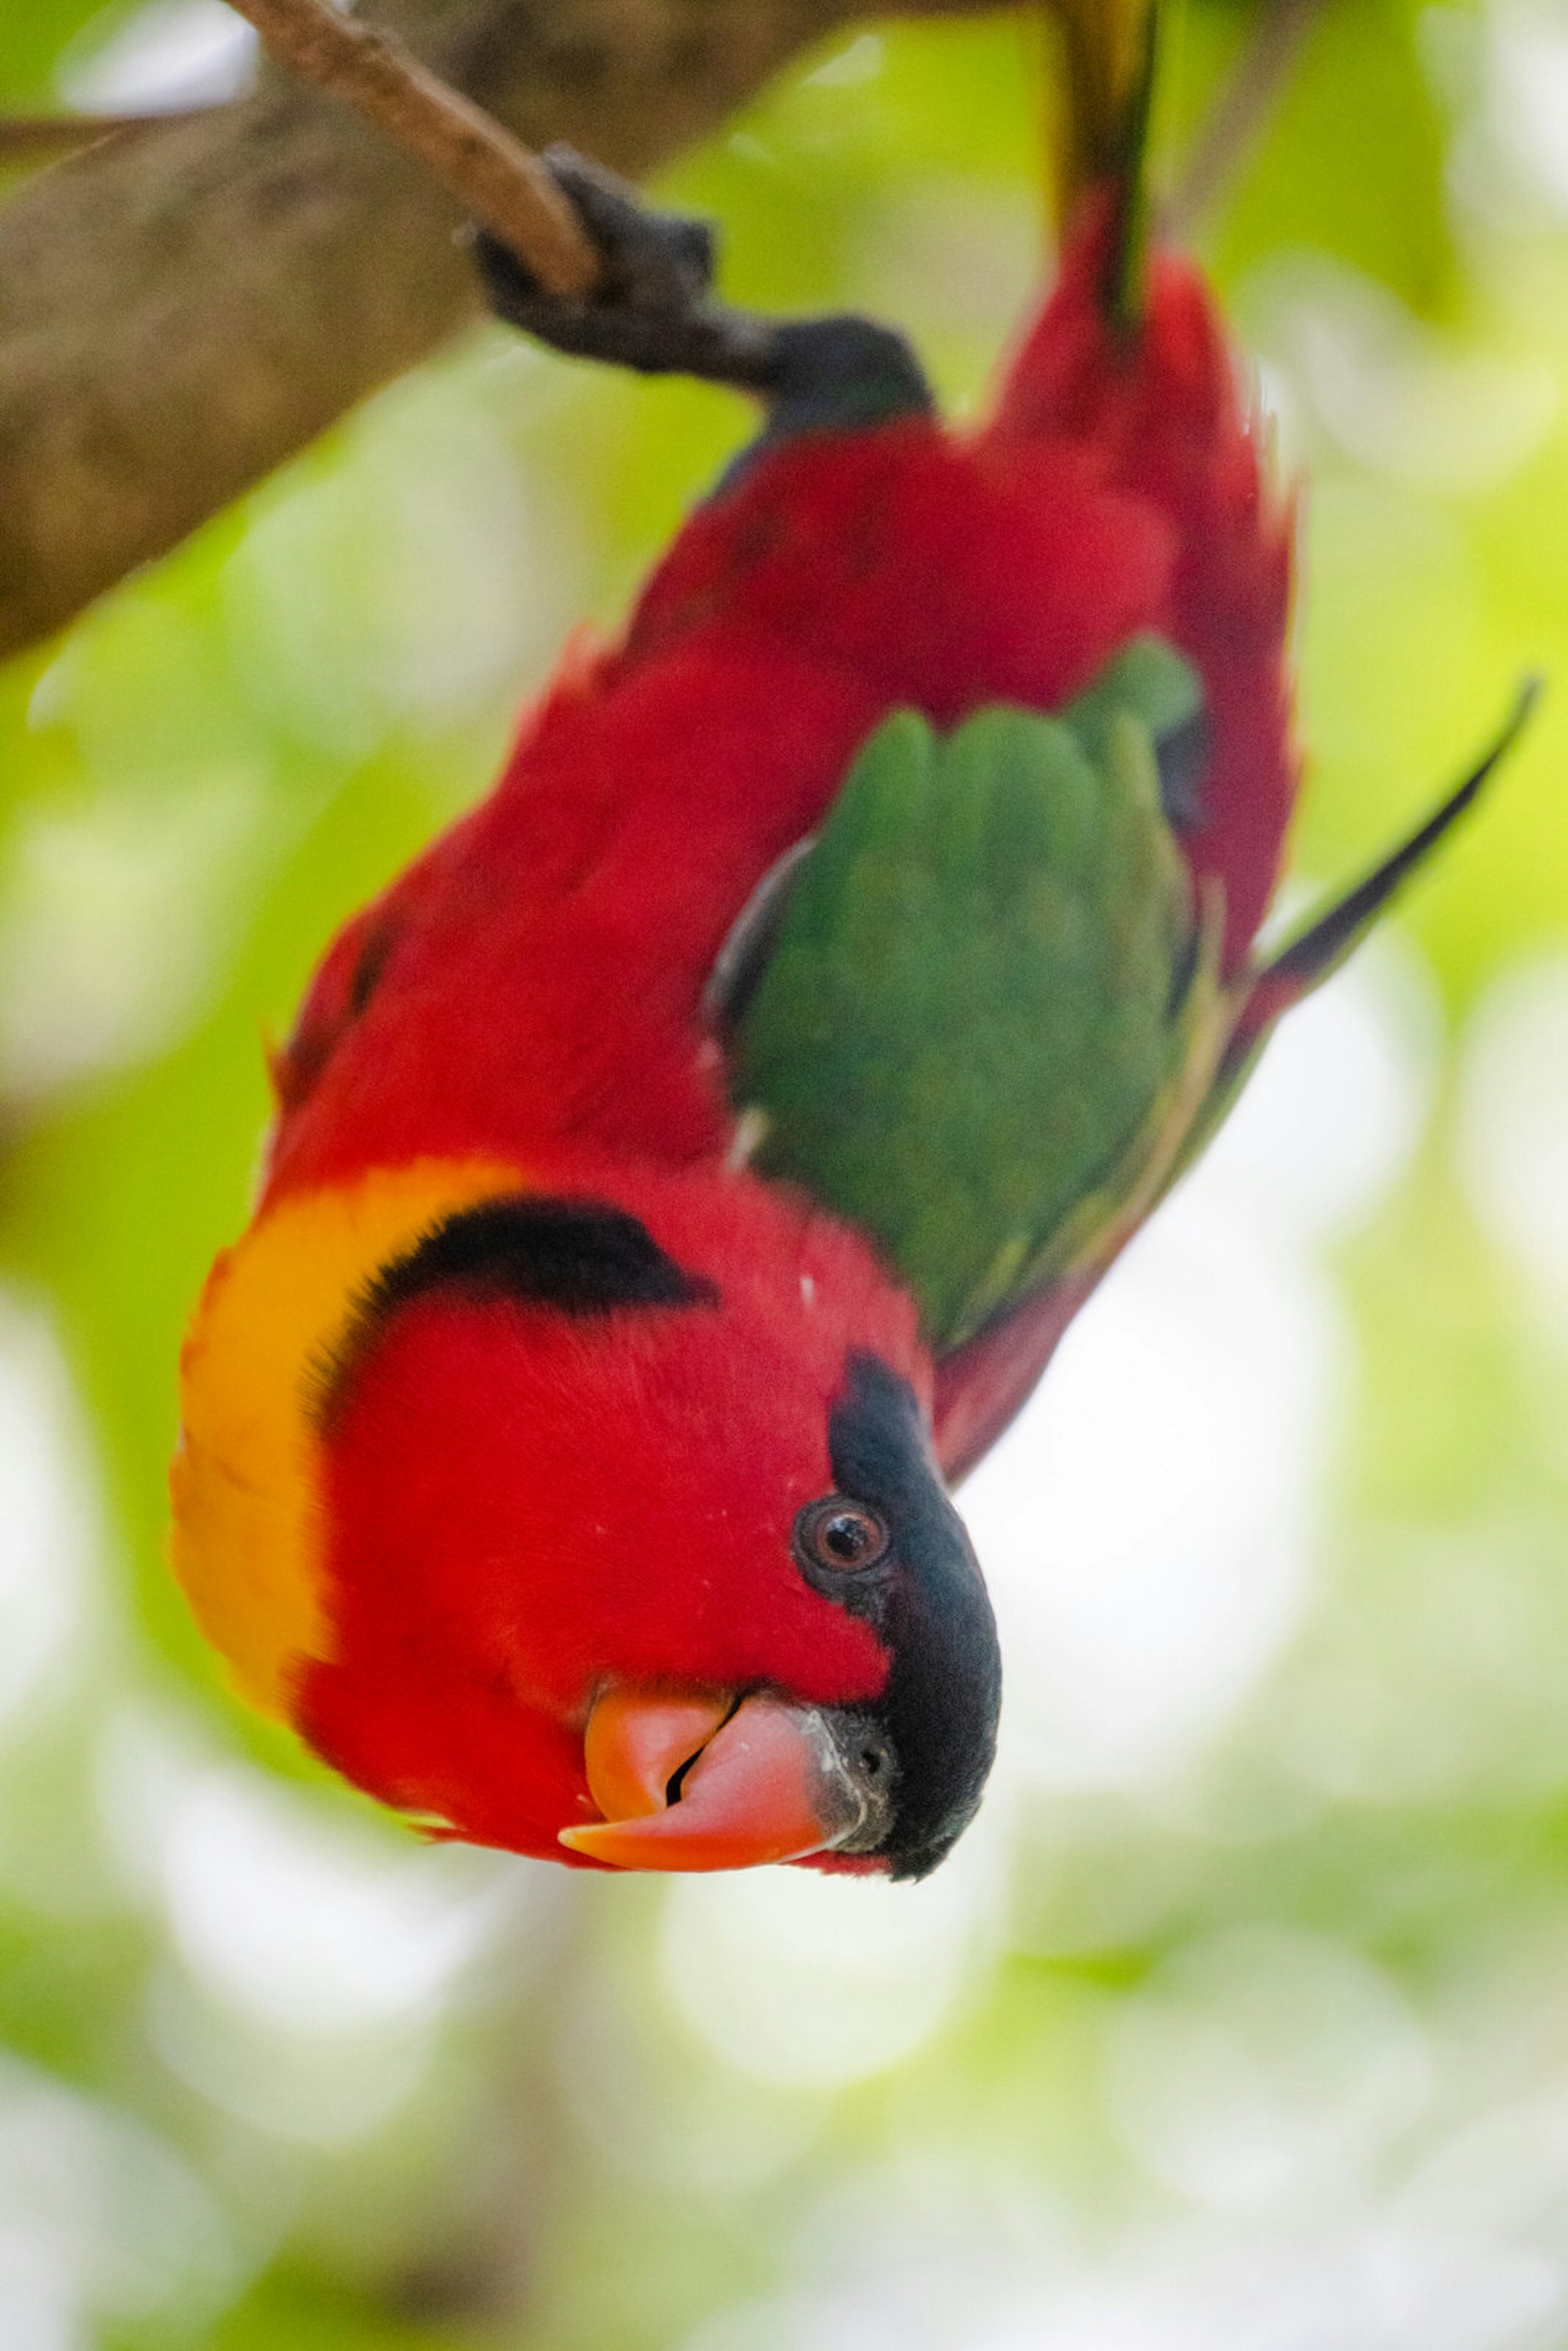 A colourful parrot hangs upside down from a tree branch, peering into the camera lens. The parrot's head is black and red, it has a yellow breast and green and red body. 